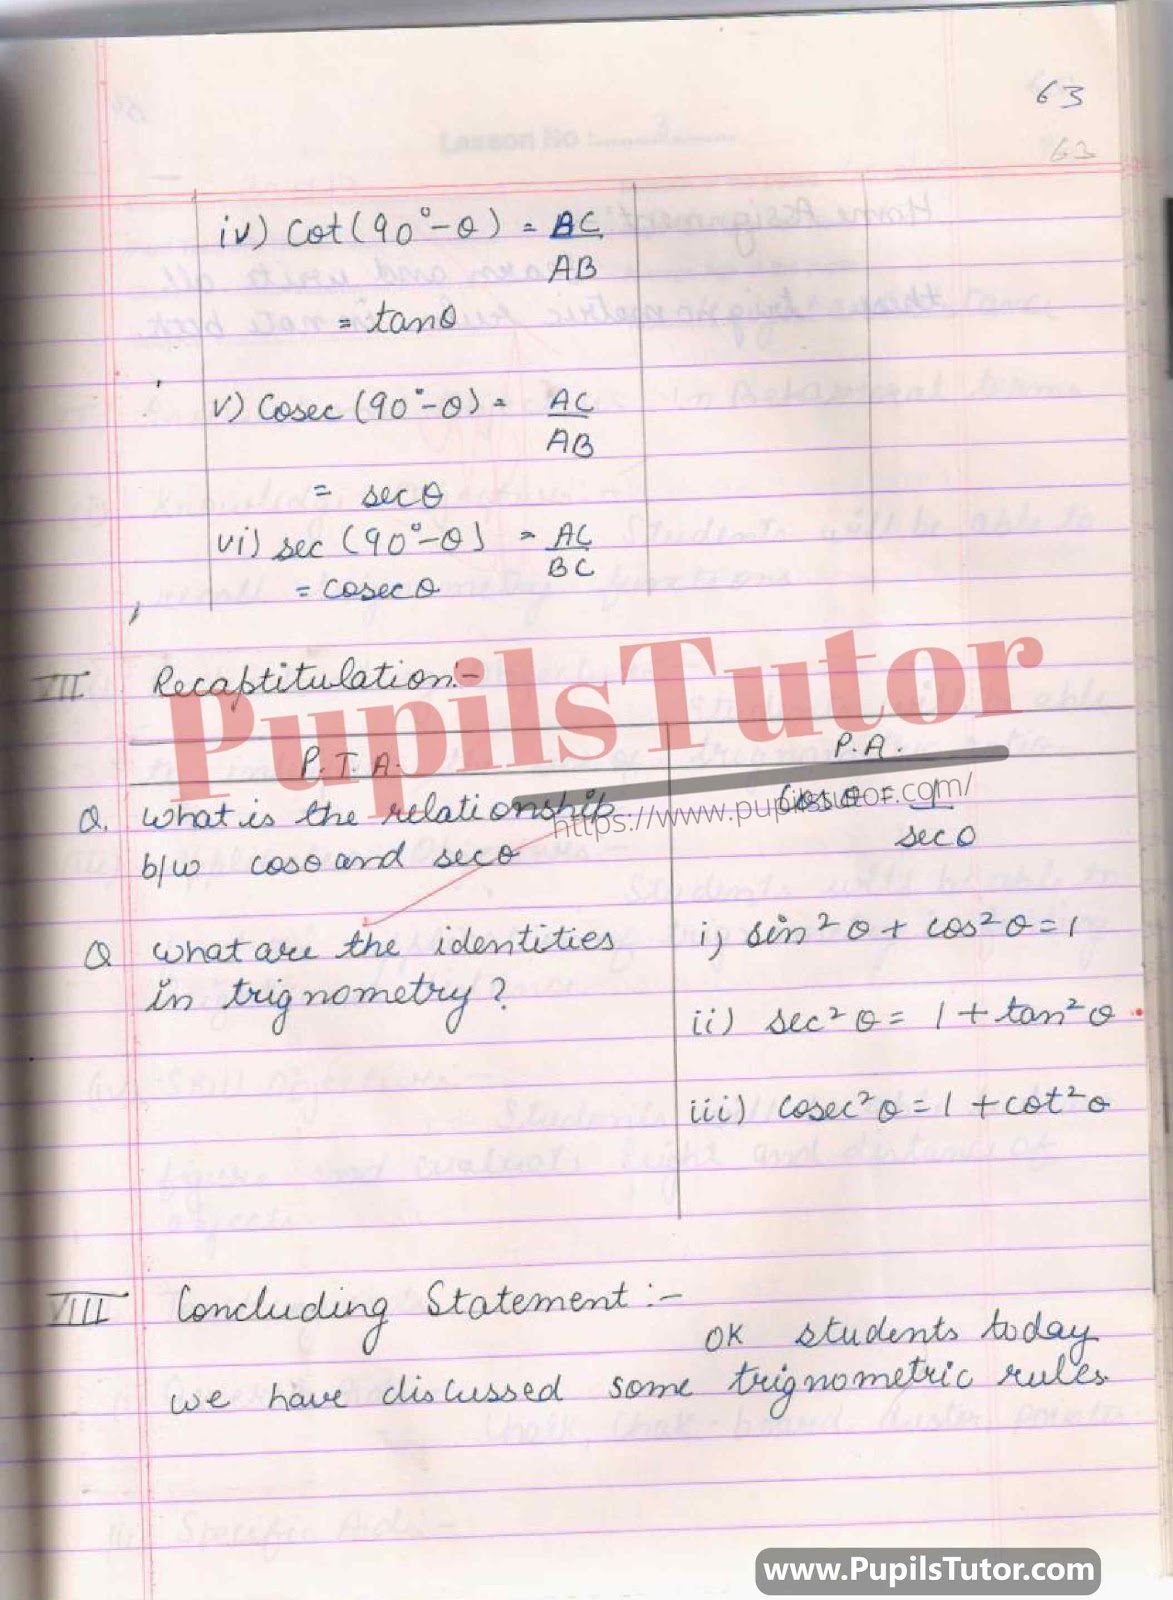 Lesson Plan On Trigonometry For Class 10th, 11th.  – [Page And Pic Number 5] – https://www.pupilstutor.com/